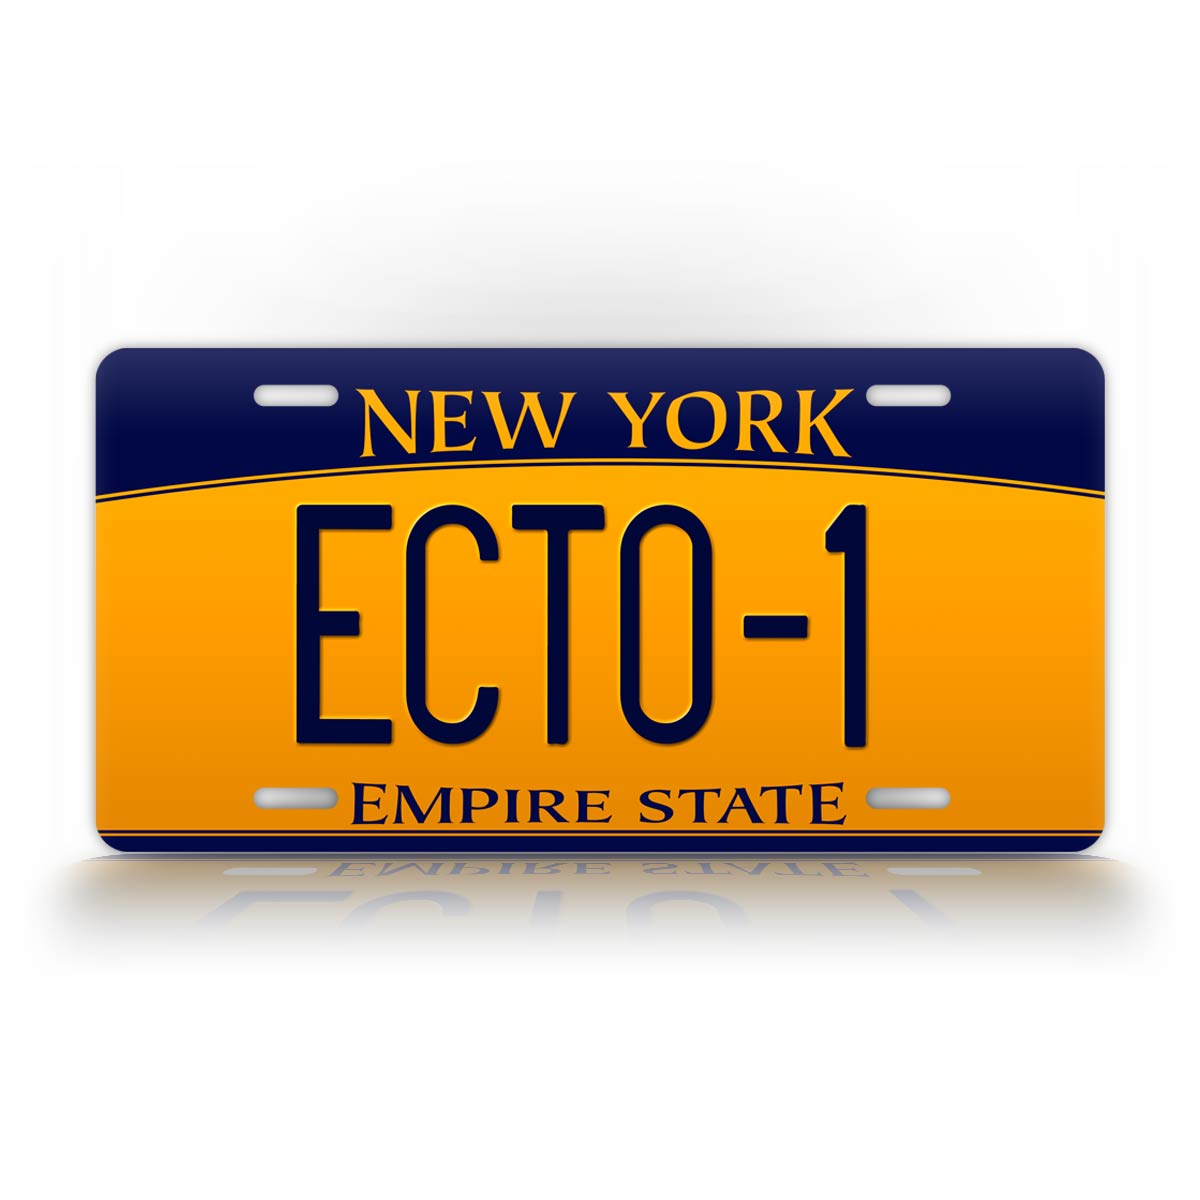 Ghost Busters New York License Plate Ecto-1 Movie Prop